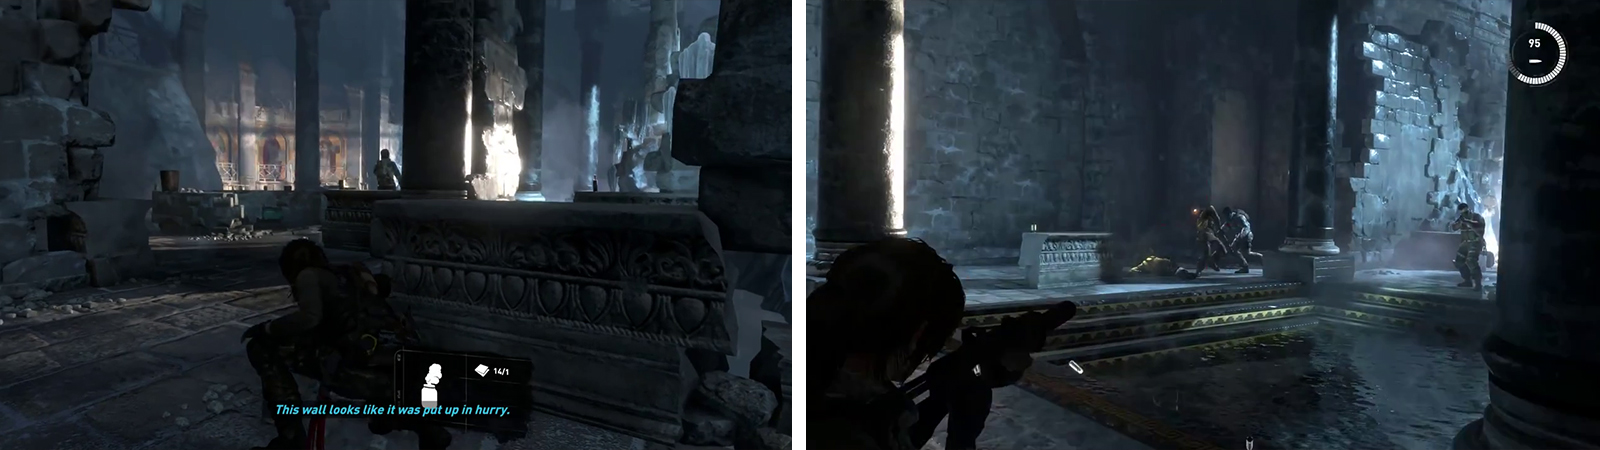 Take out the enemies in the first room silently (left) before focusing on either shooting or stealthing the other enemies in the adjacent room (right).